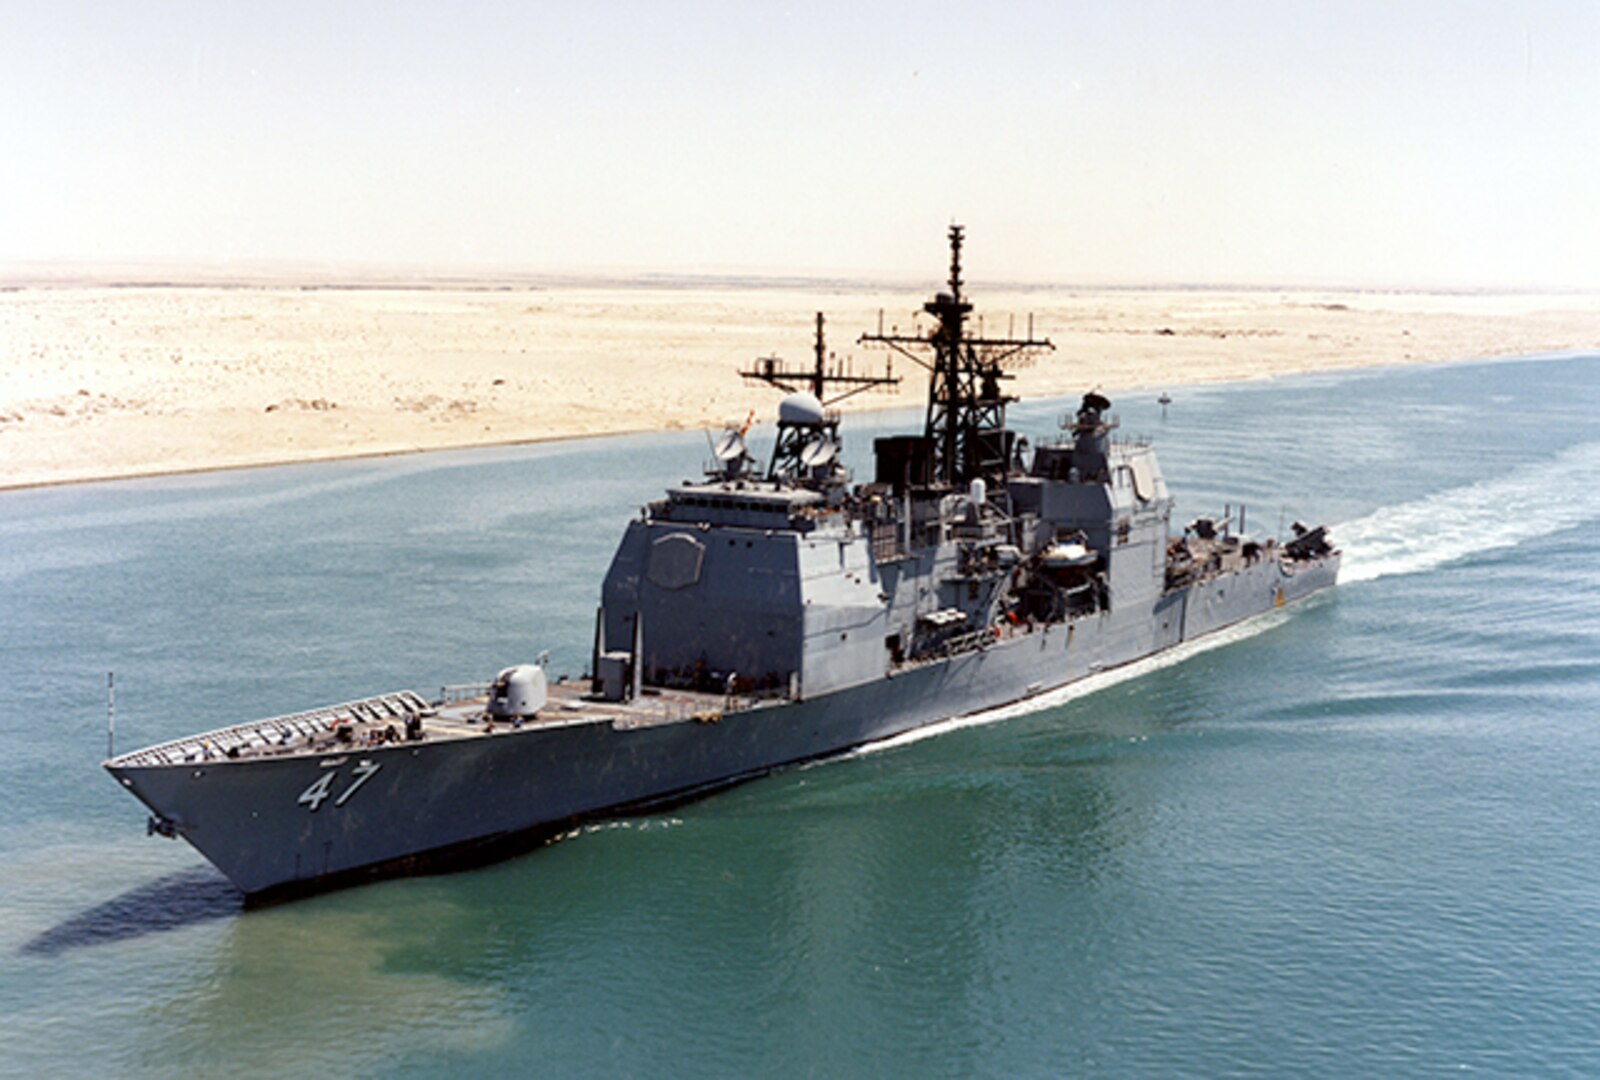 A Navy ship moves from right to left in blue water with sand of the desert behind it.